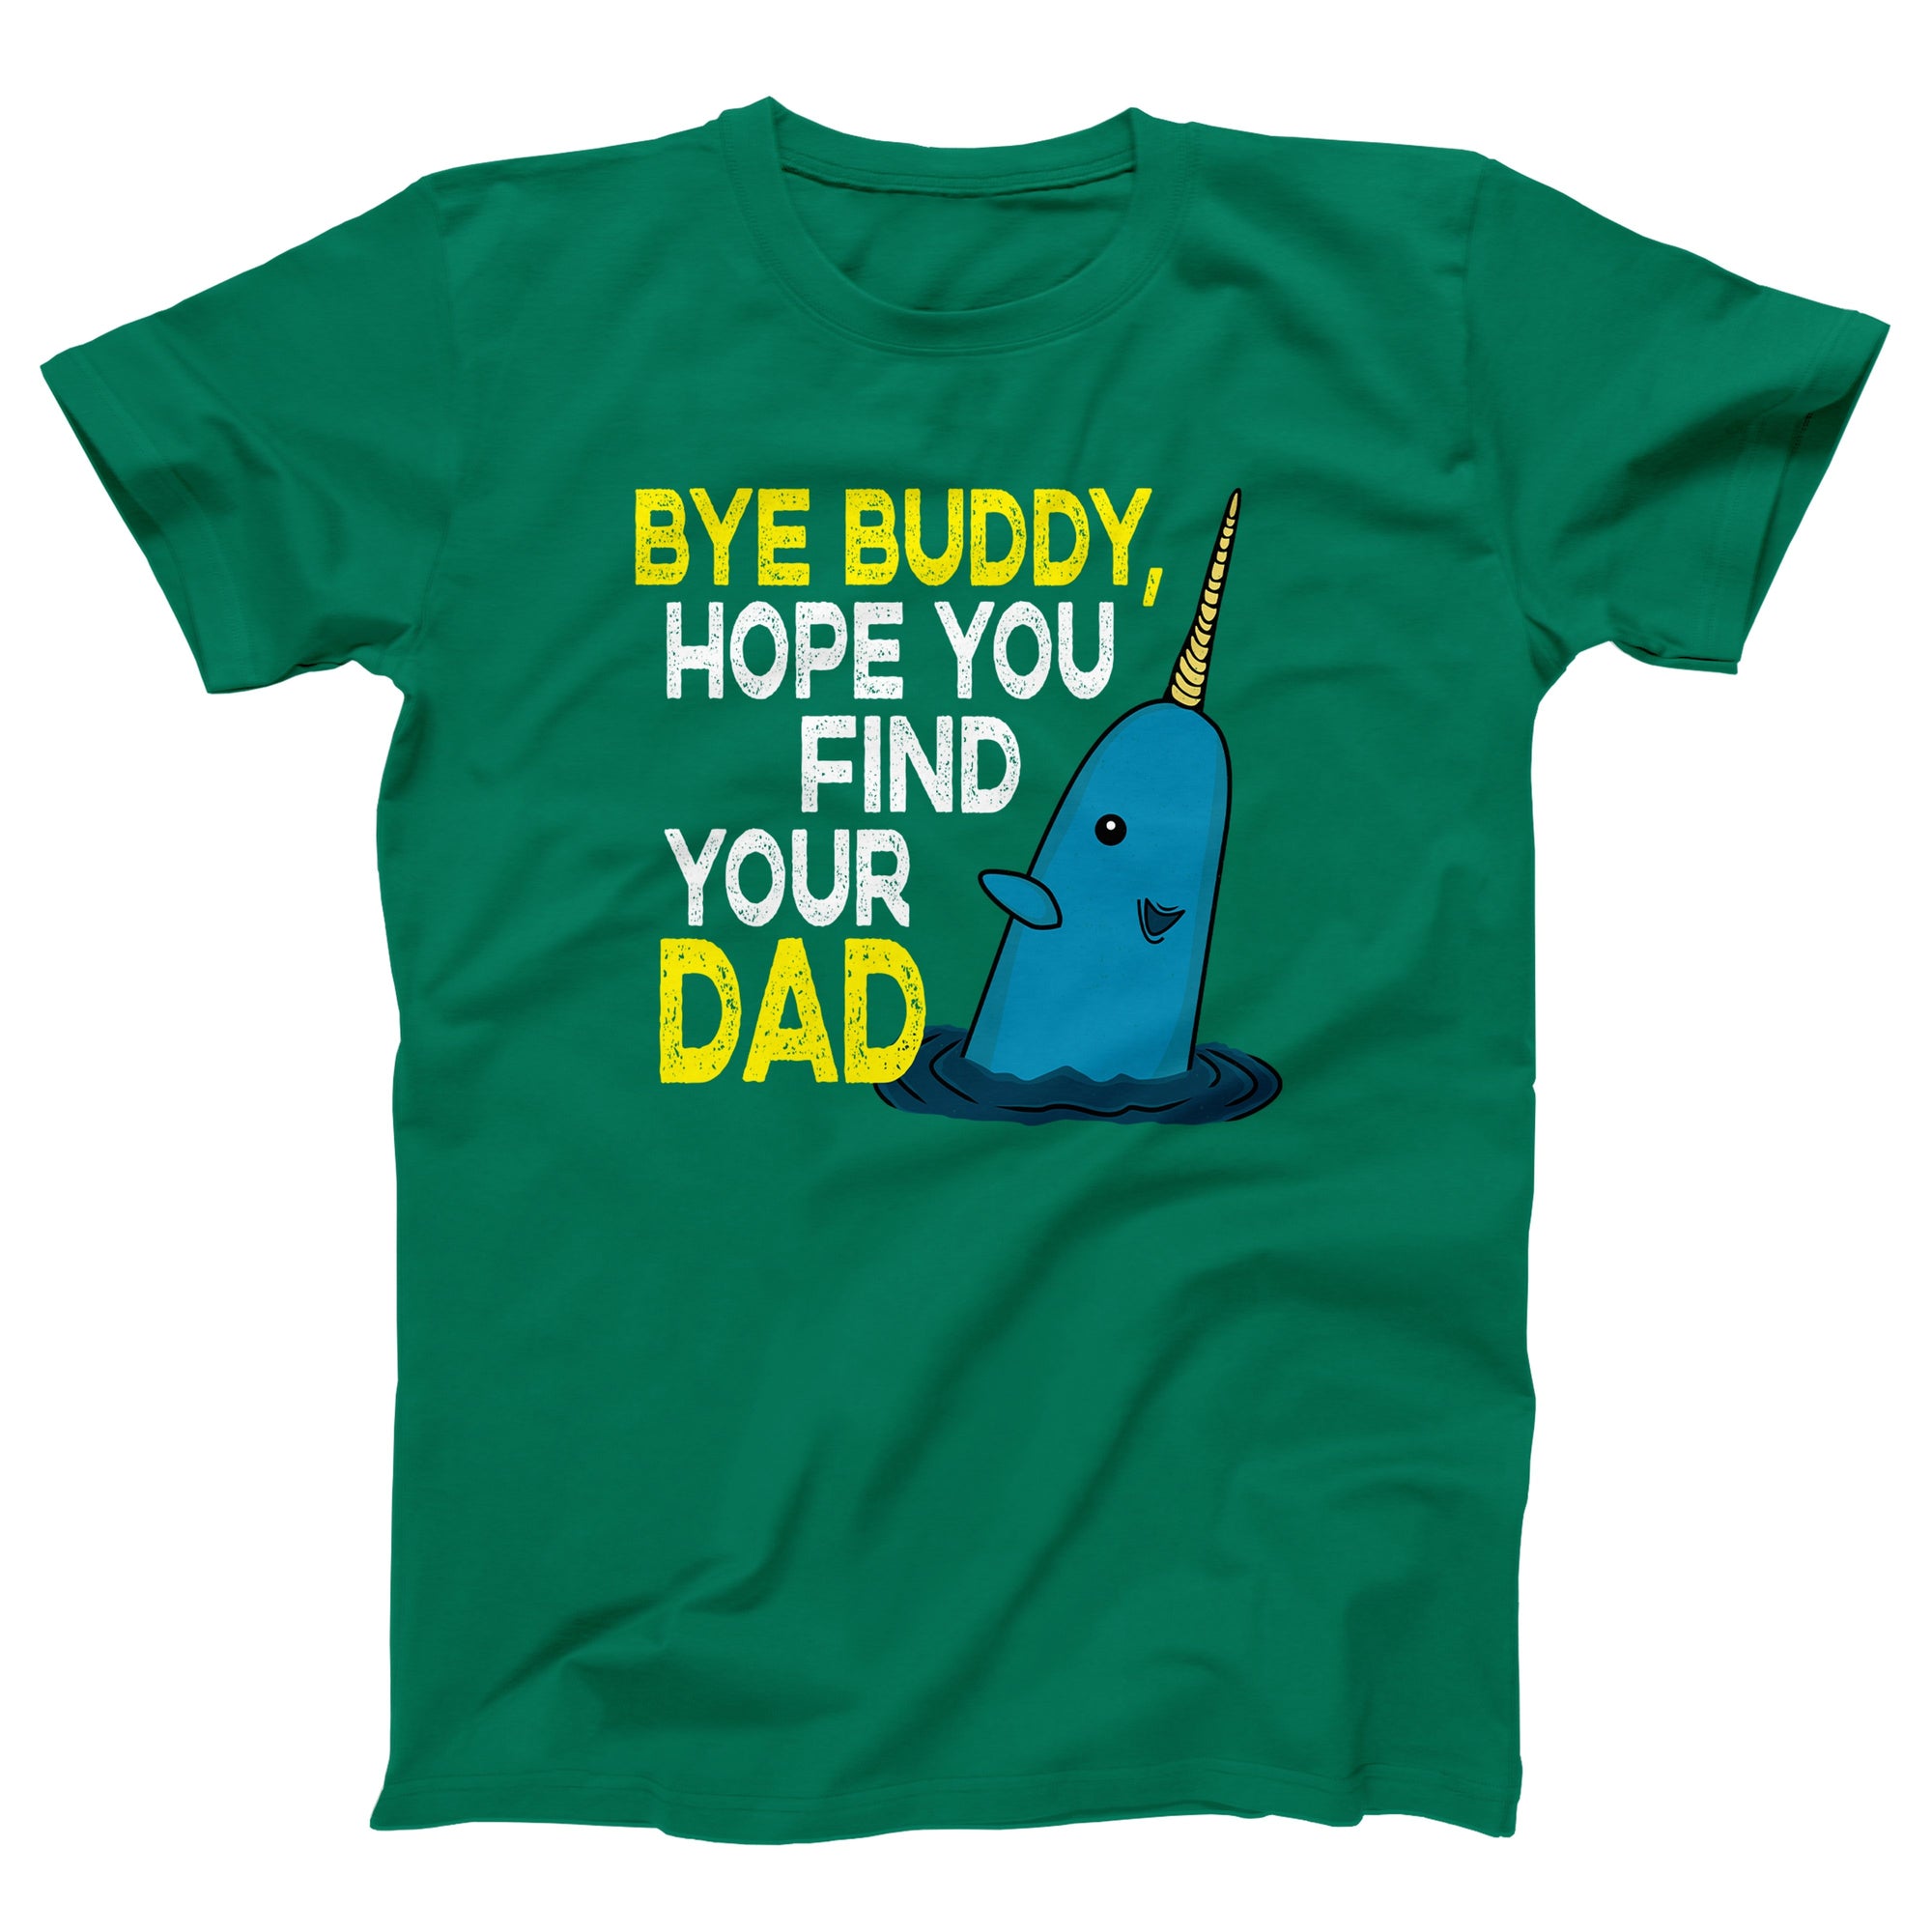 Bye Buddy Hope You Find Your Dad Adult Unisex T-Shirt